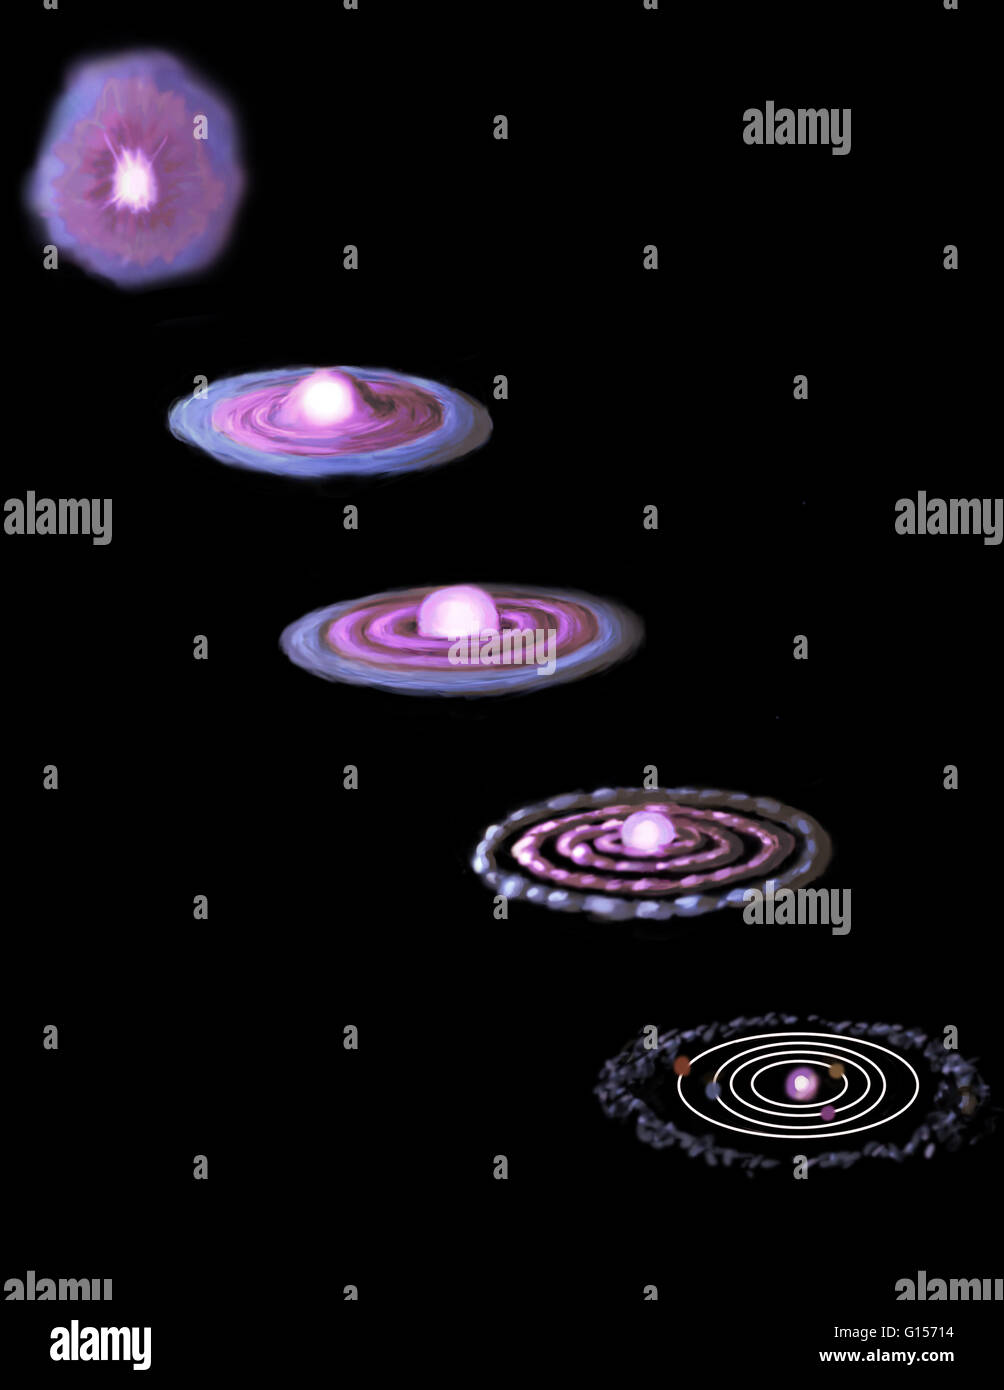 Artwork Showing Stages In The Formation Of The Solar System